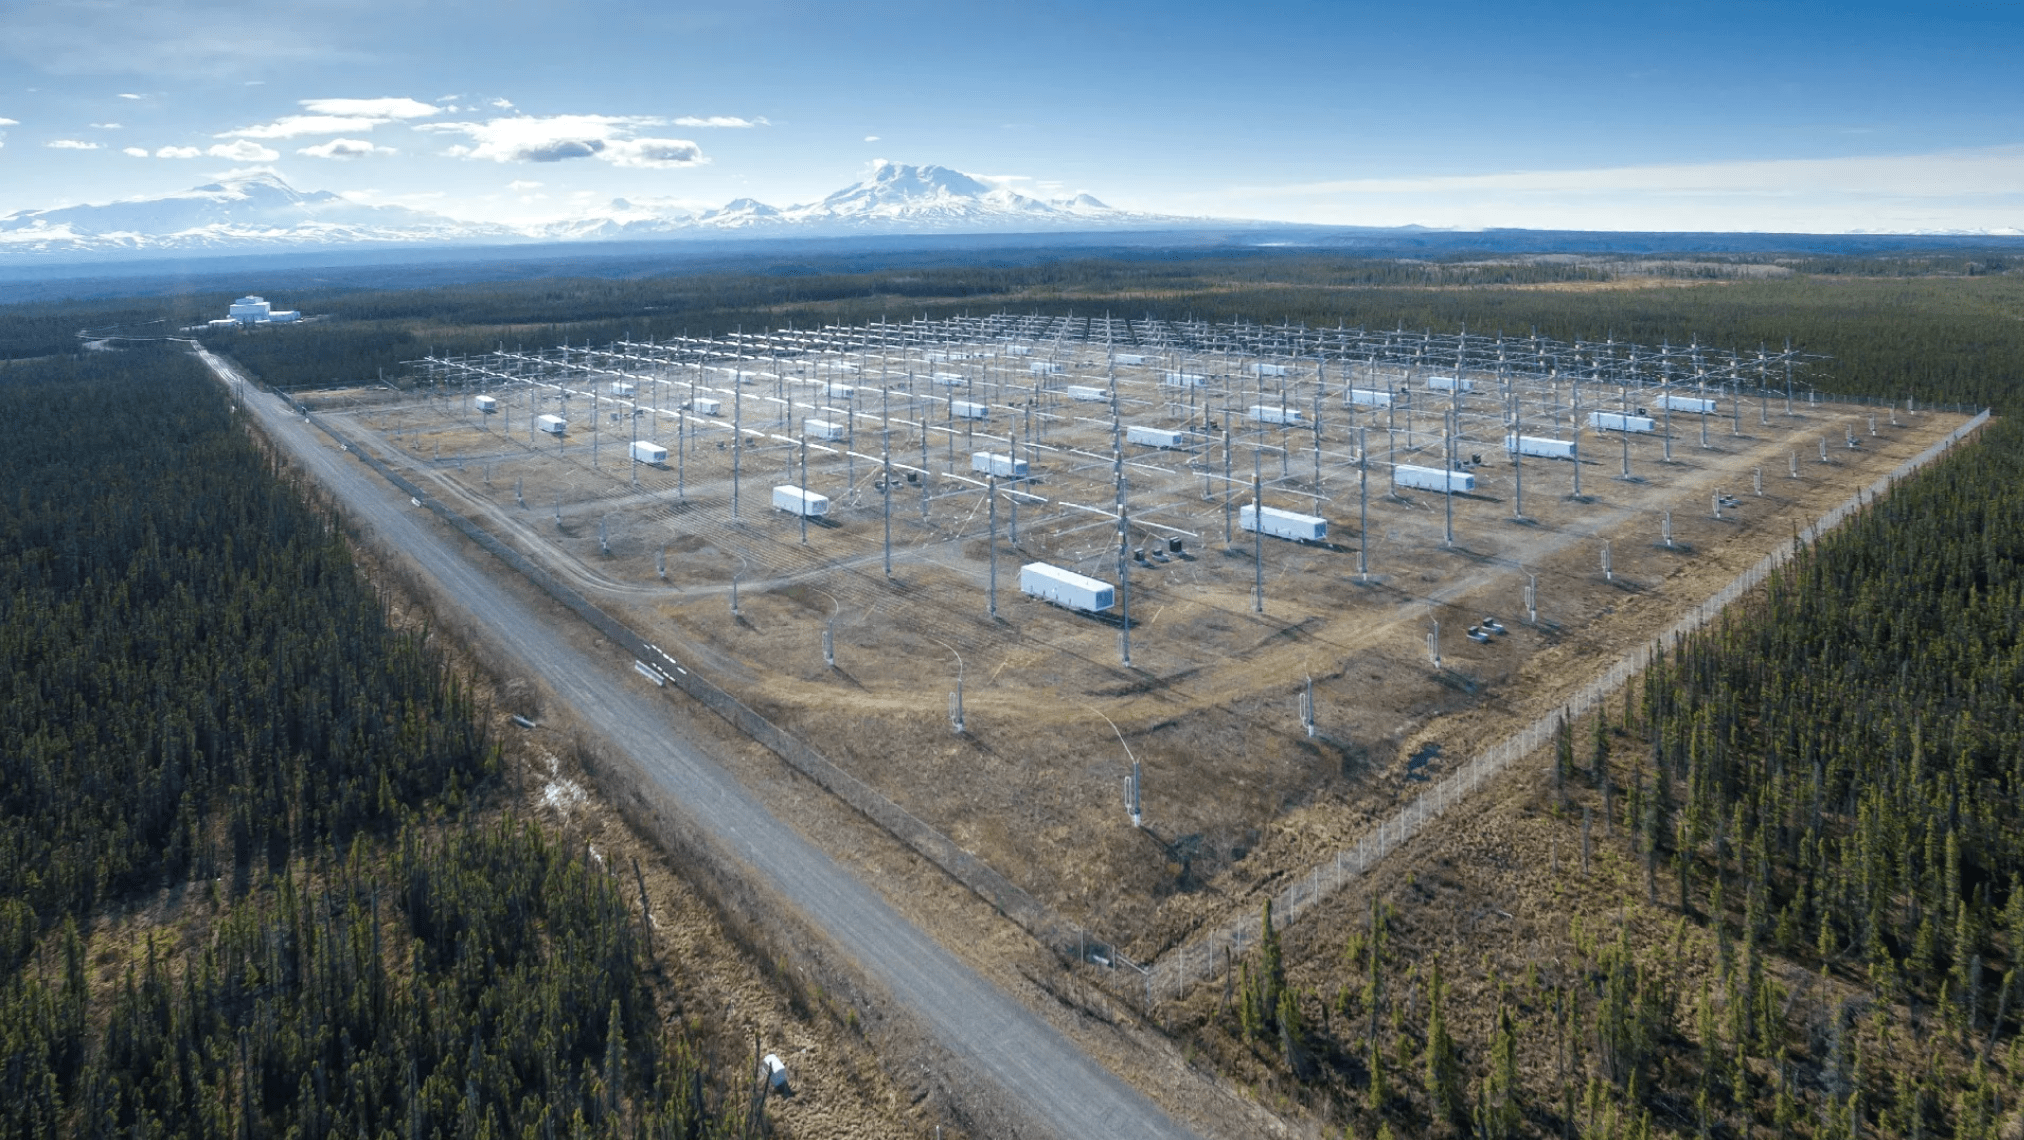 The antenna array at the High-Frequency Active Auroral Research Program facility. (Image credit: USAF/Jessica Matthews, University of Alaska Fairbanks)